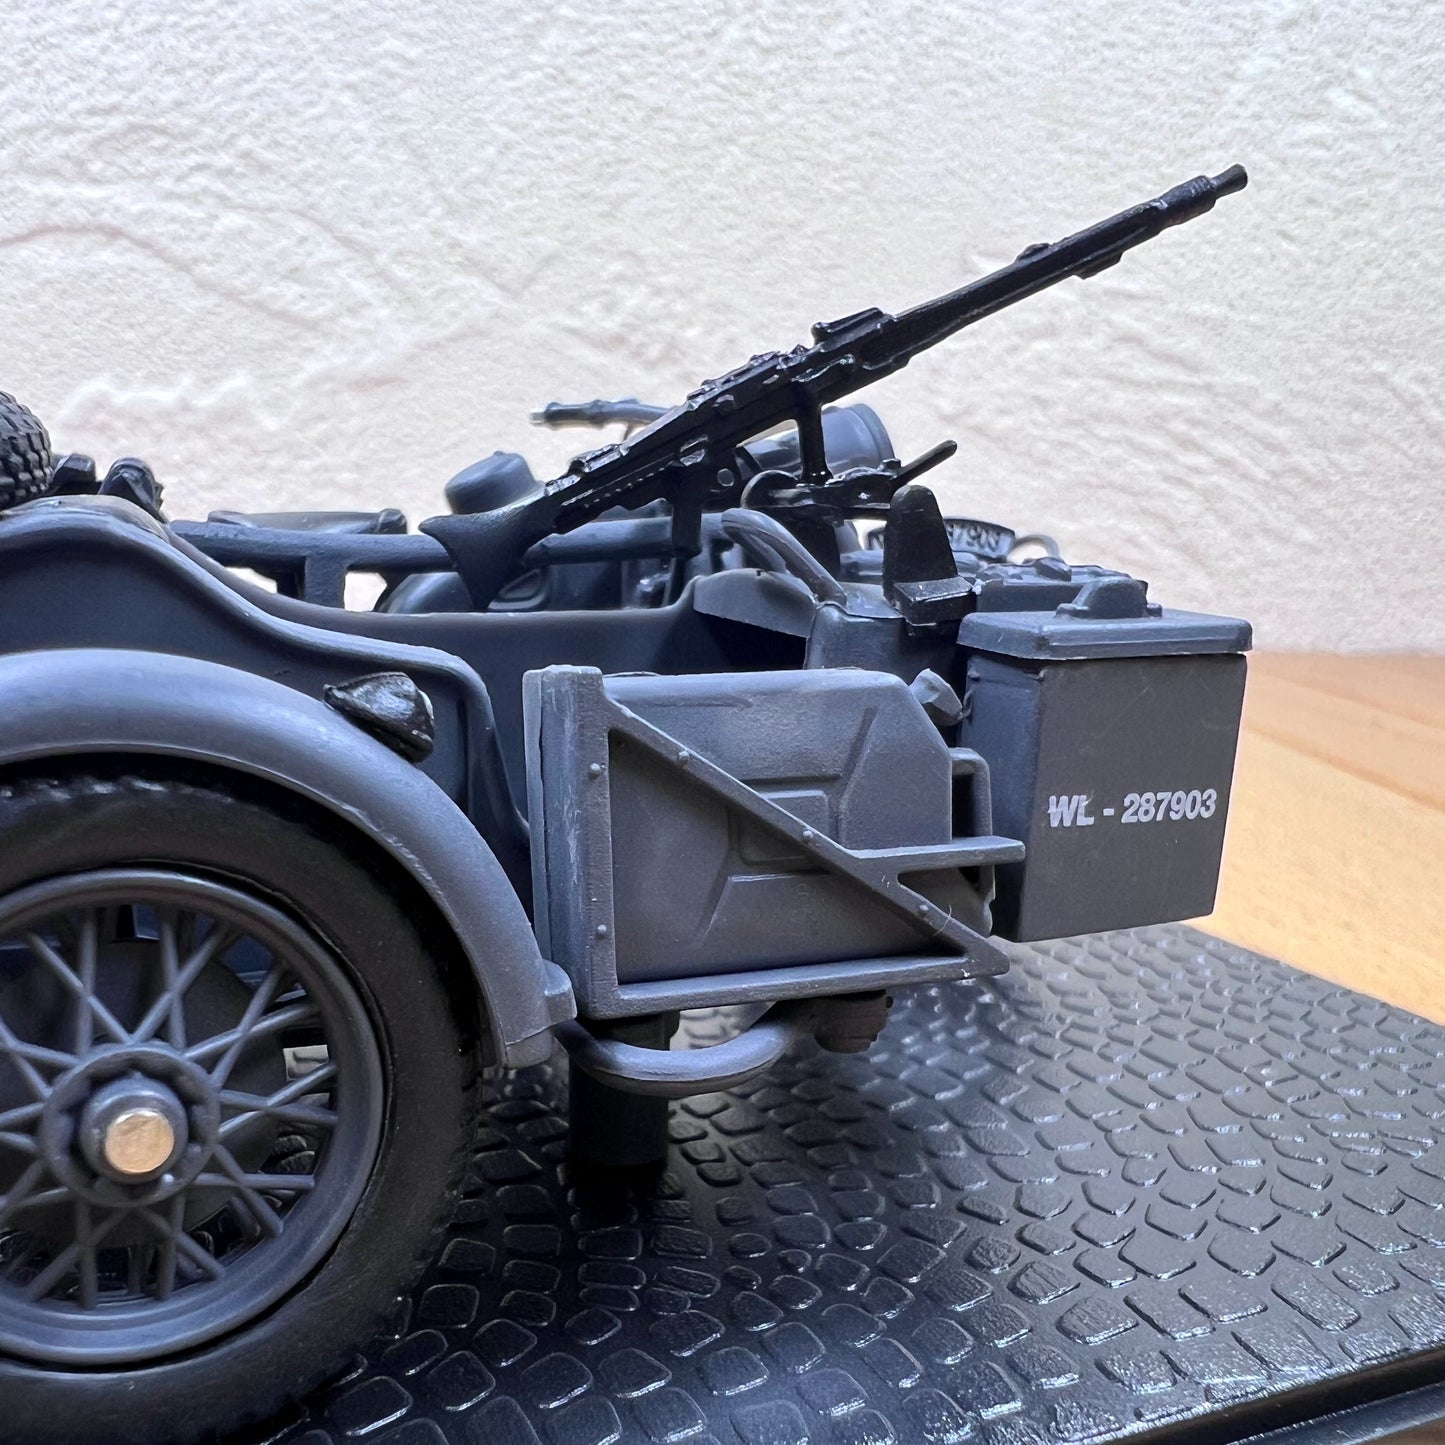 1/24 Scale BMW R75 Motorcycle Panzerfaust 30 WWII Military Vehicle Diecast Model